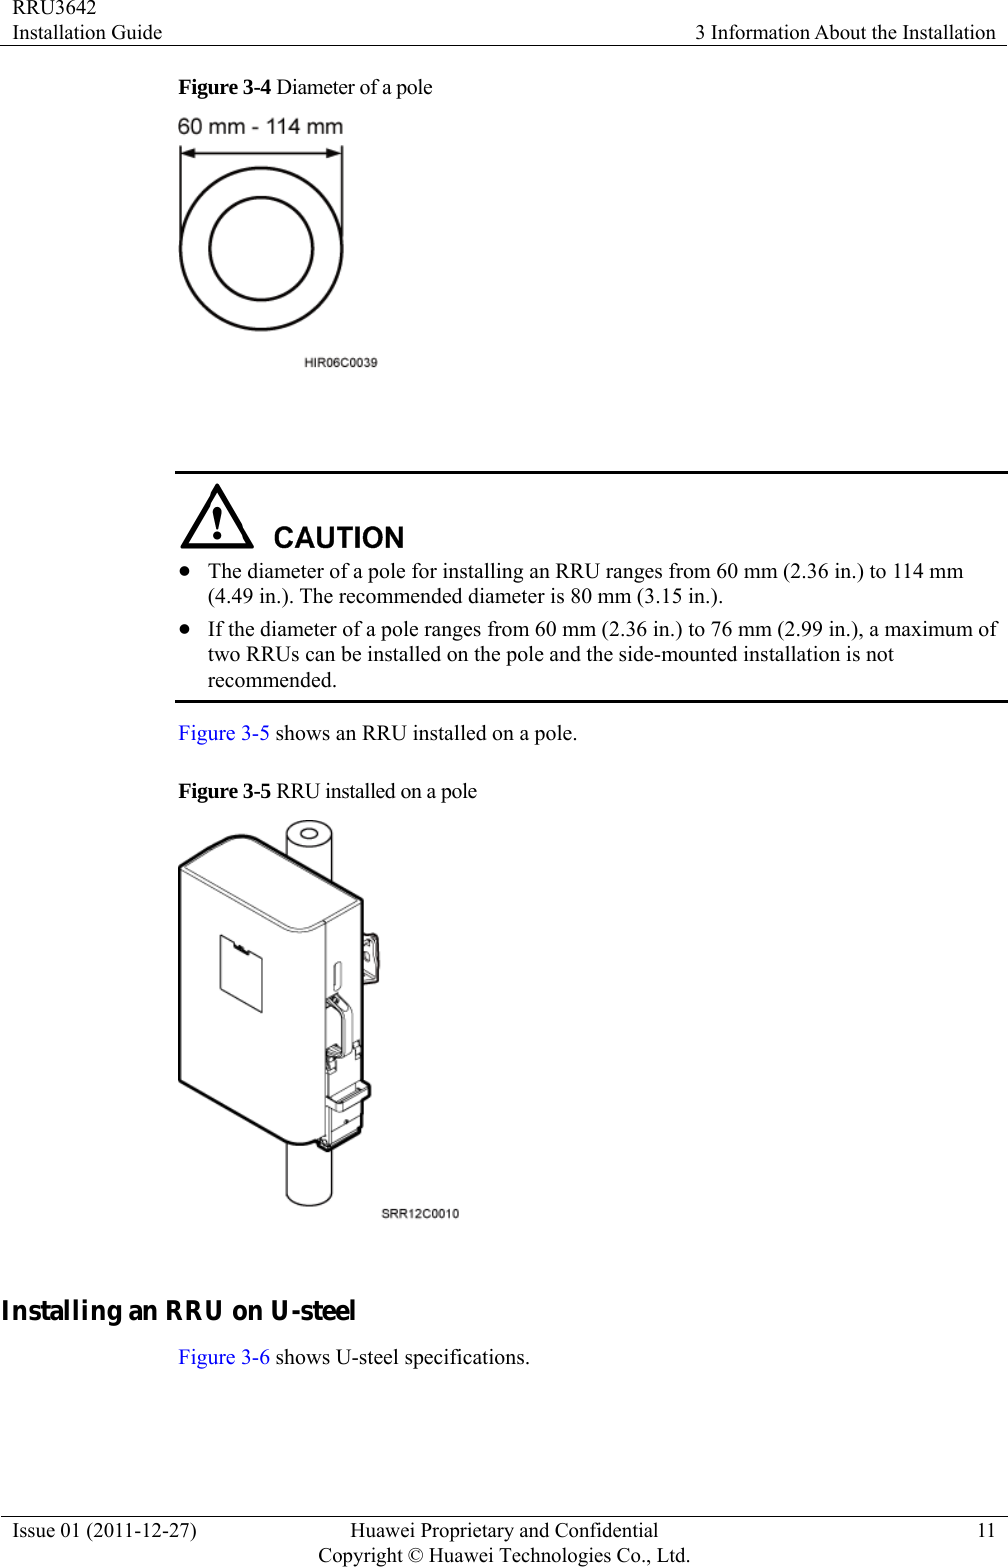 RRU3642 Installation Guide  3 Information About the Installation Issue 01 (2011-12-27)  Huawei Proprietary and Confidential         Copyright © Huawei Technologies Co., Ltd.11 Figure 3-4 Diameter of a pole     z The diameter of a pole for installing an RRU ranges from 60 mm (2.36 in.) to 114 mm (4.49 in.). The recommended diameter is 80 mm (3.15 in.). z If the diameter of a pole ranges from 60 mm (2.36 in.) to 76 mm (2.99 in.), a maximum of two RRUs can be installed on the pole and the side-mounted installation is not recommended. Figure 3-5 shows an RRU installed on a pole.   Figure 3-5 RRU installed on a pole   Installing an RRU on U-steel Figure 3-6 shows U-steel specifications. 